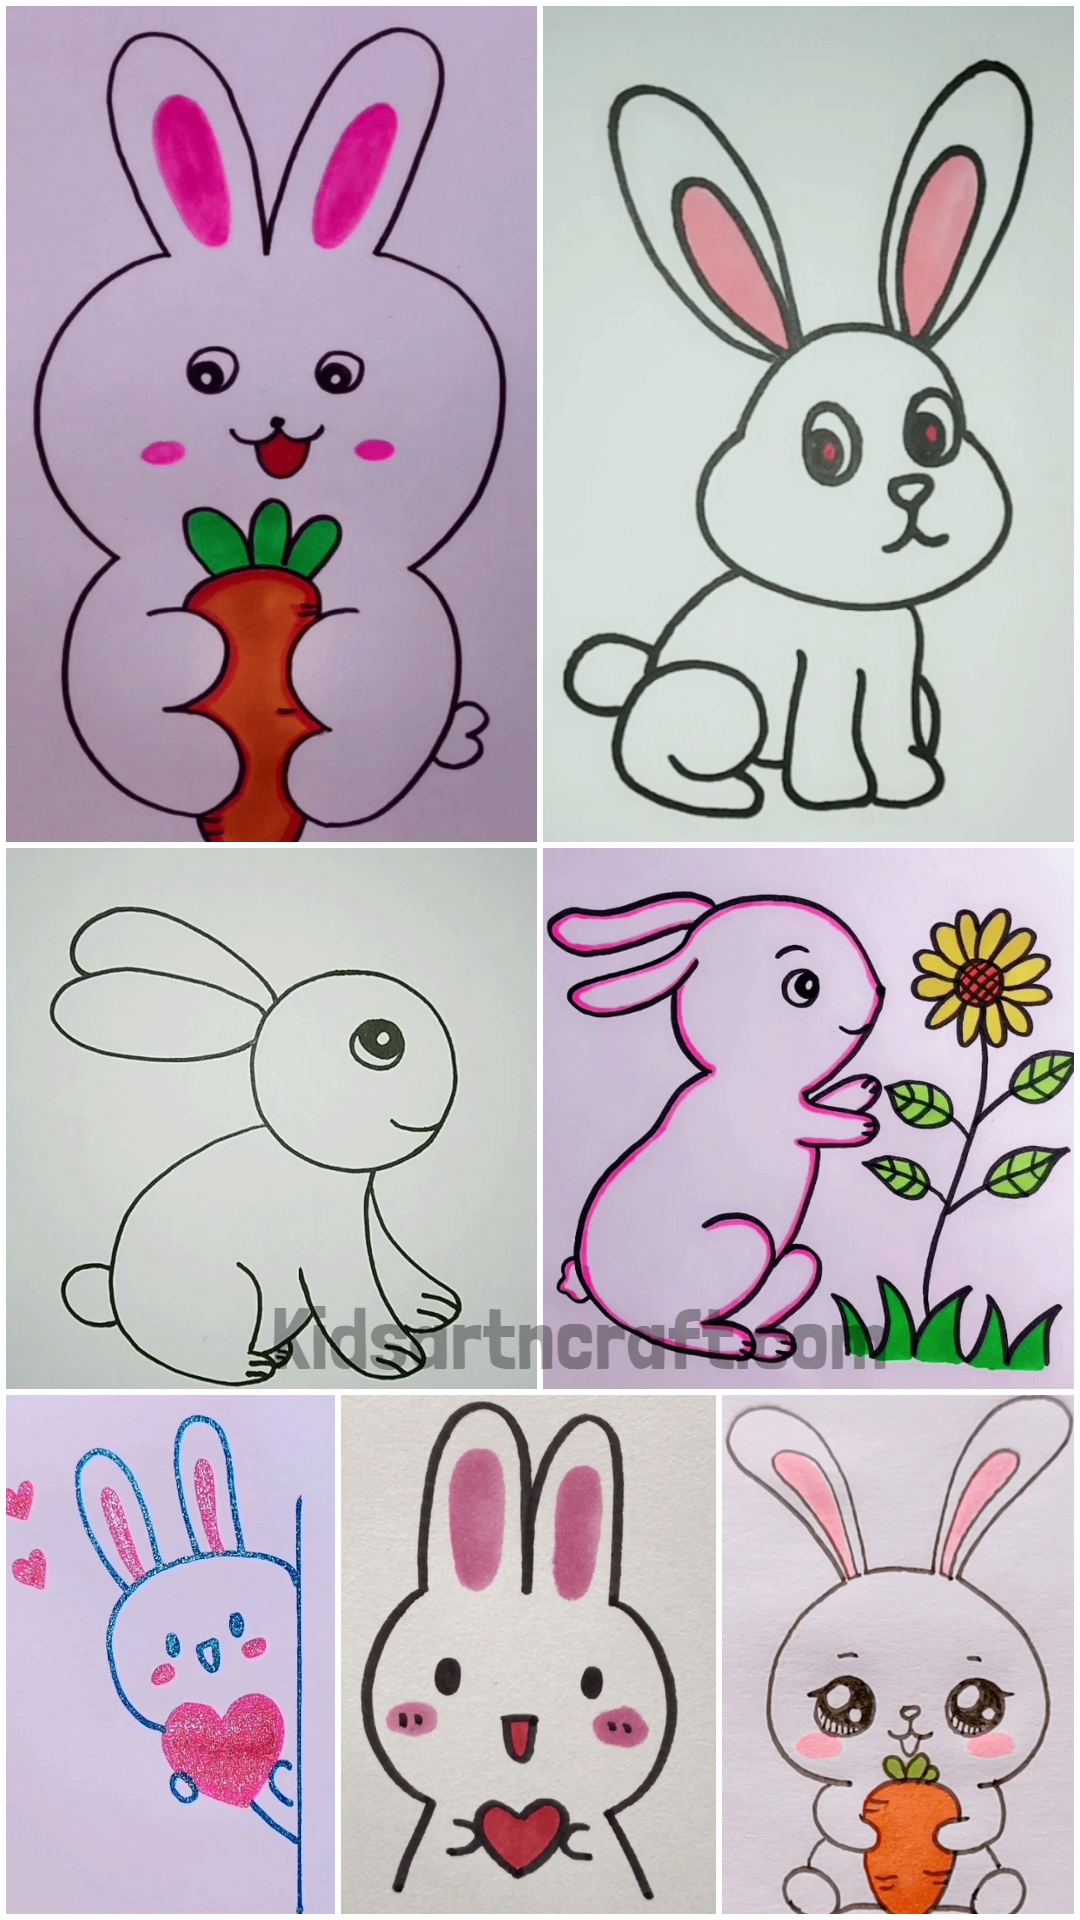 How to Draw a Bunny for Kids - Easy Step by Step Tutorial - K4 Craft